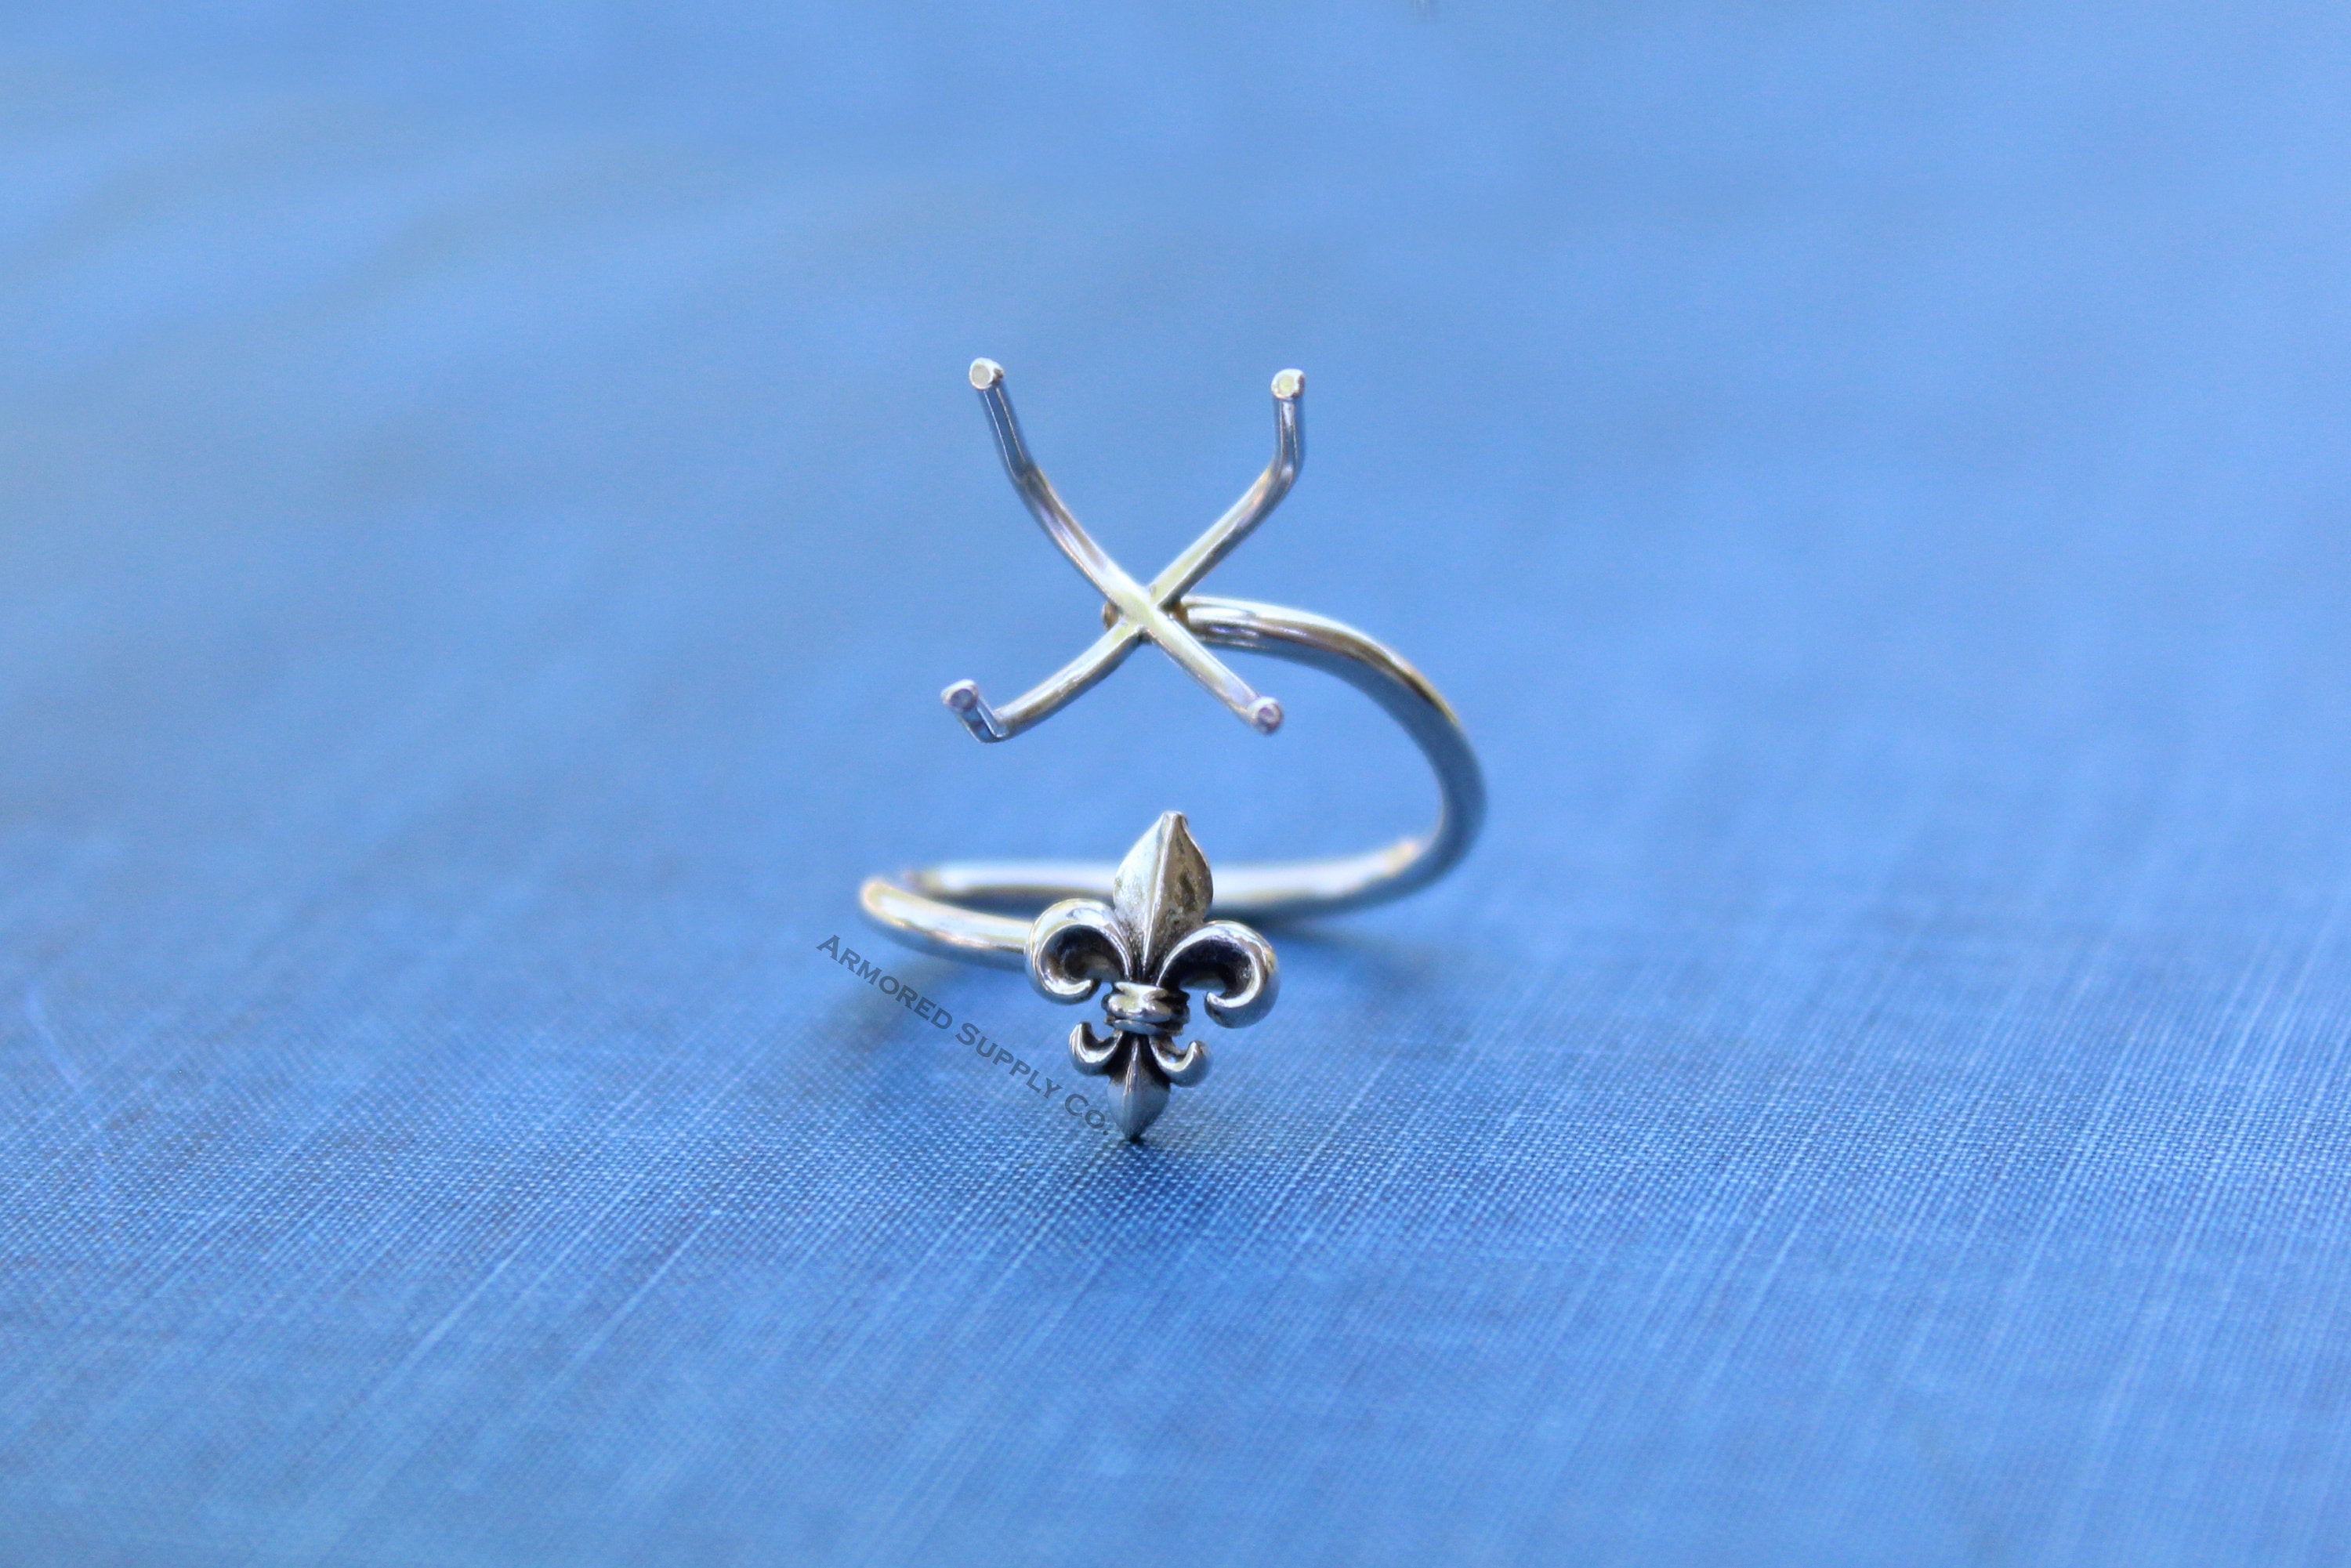 Silver Fleur De Lis Adjustable Claw Prong Ring blank, Claw Ring Setting, Breast Milk DIY jewelry supplies, build a ring, wholesale jewelry